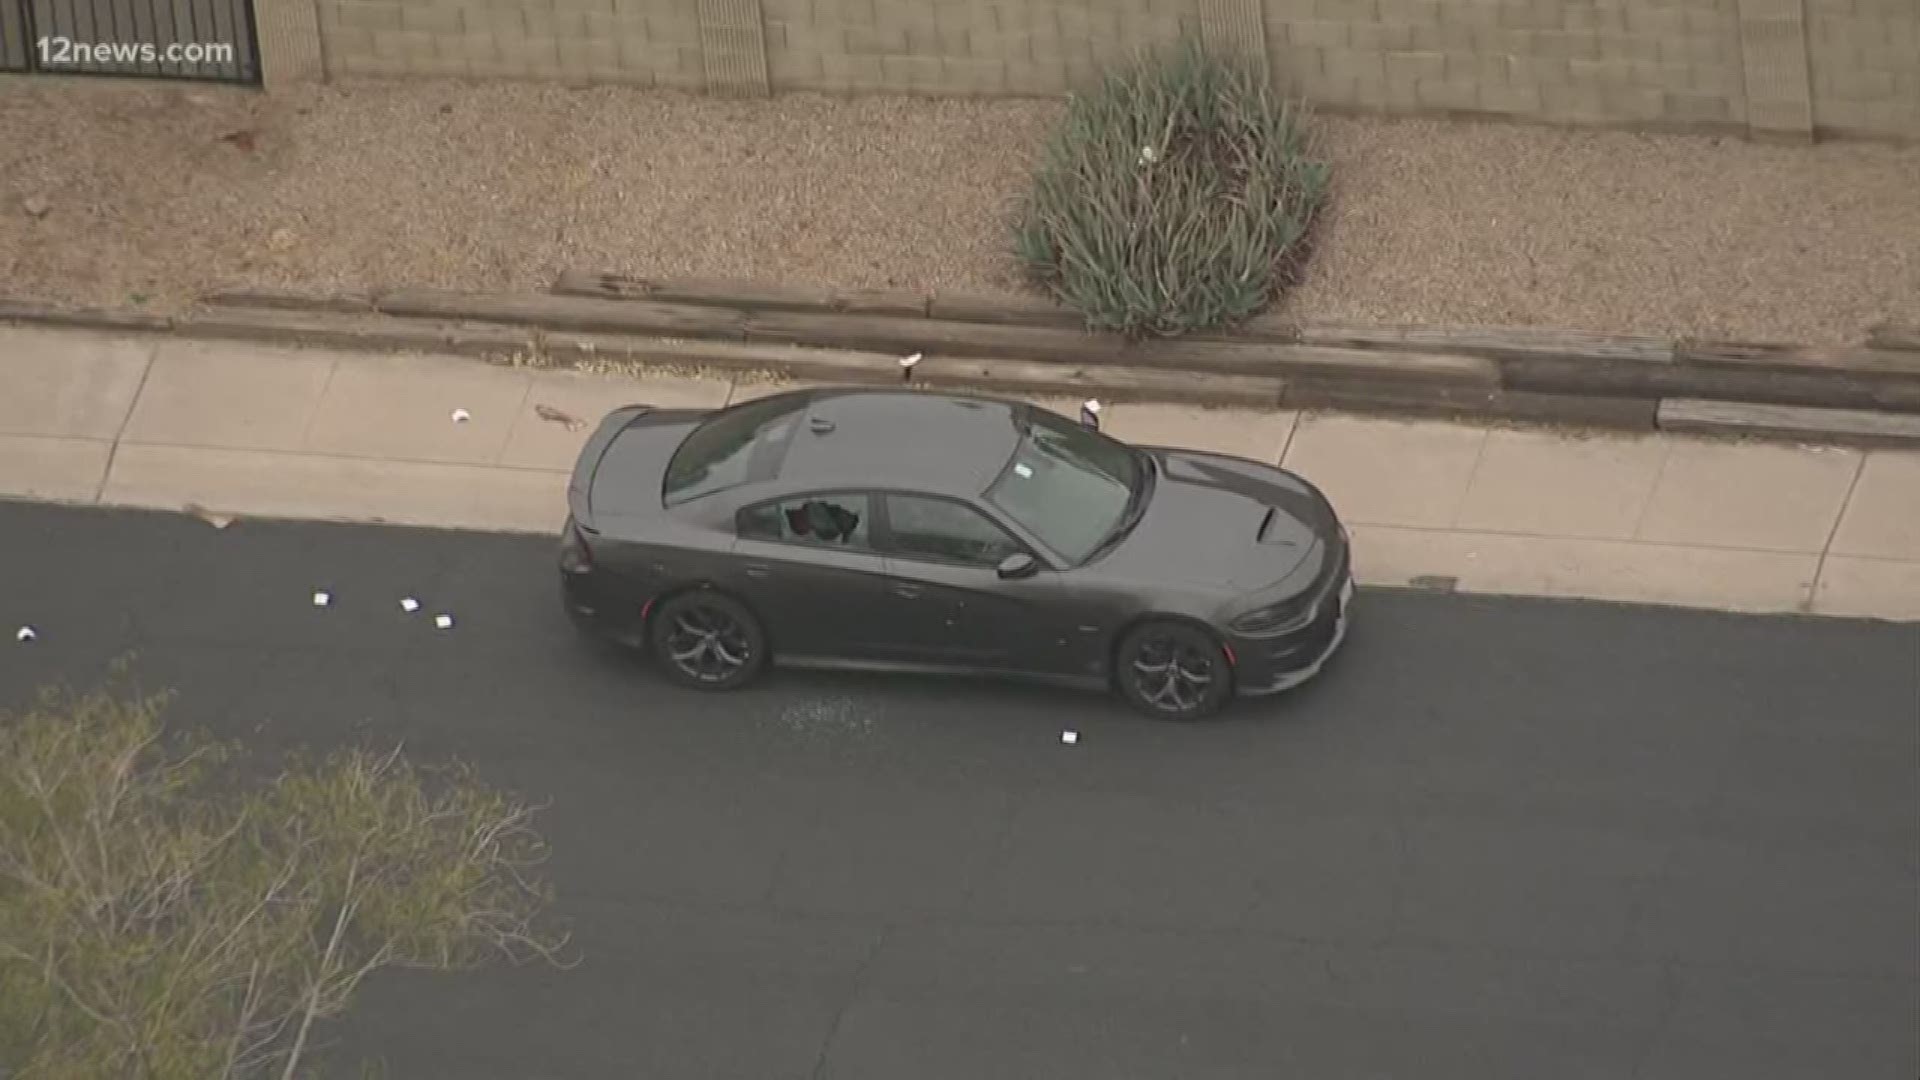 A neighborhood in Phoenix woke up to gun shots Thursday morning. A car riddled with bullet holes was found with a man dead inside near Cheryl Drive.